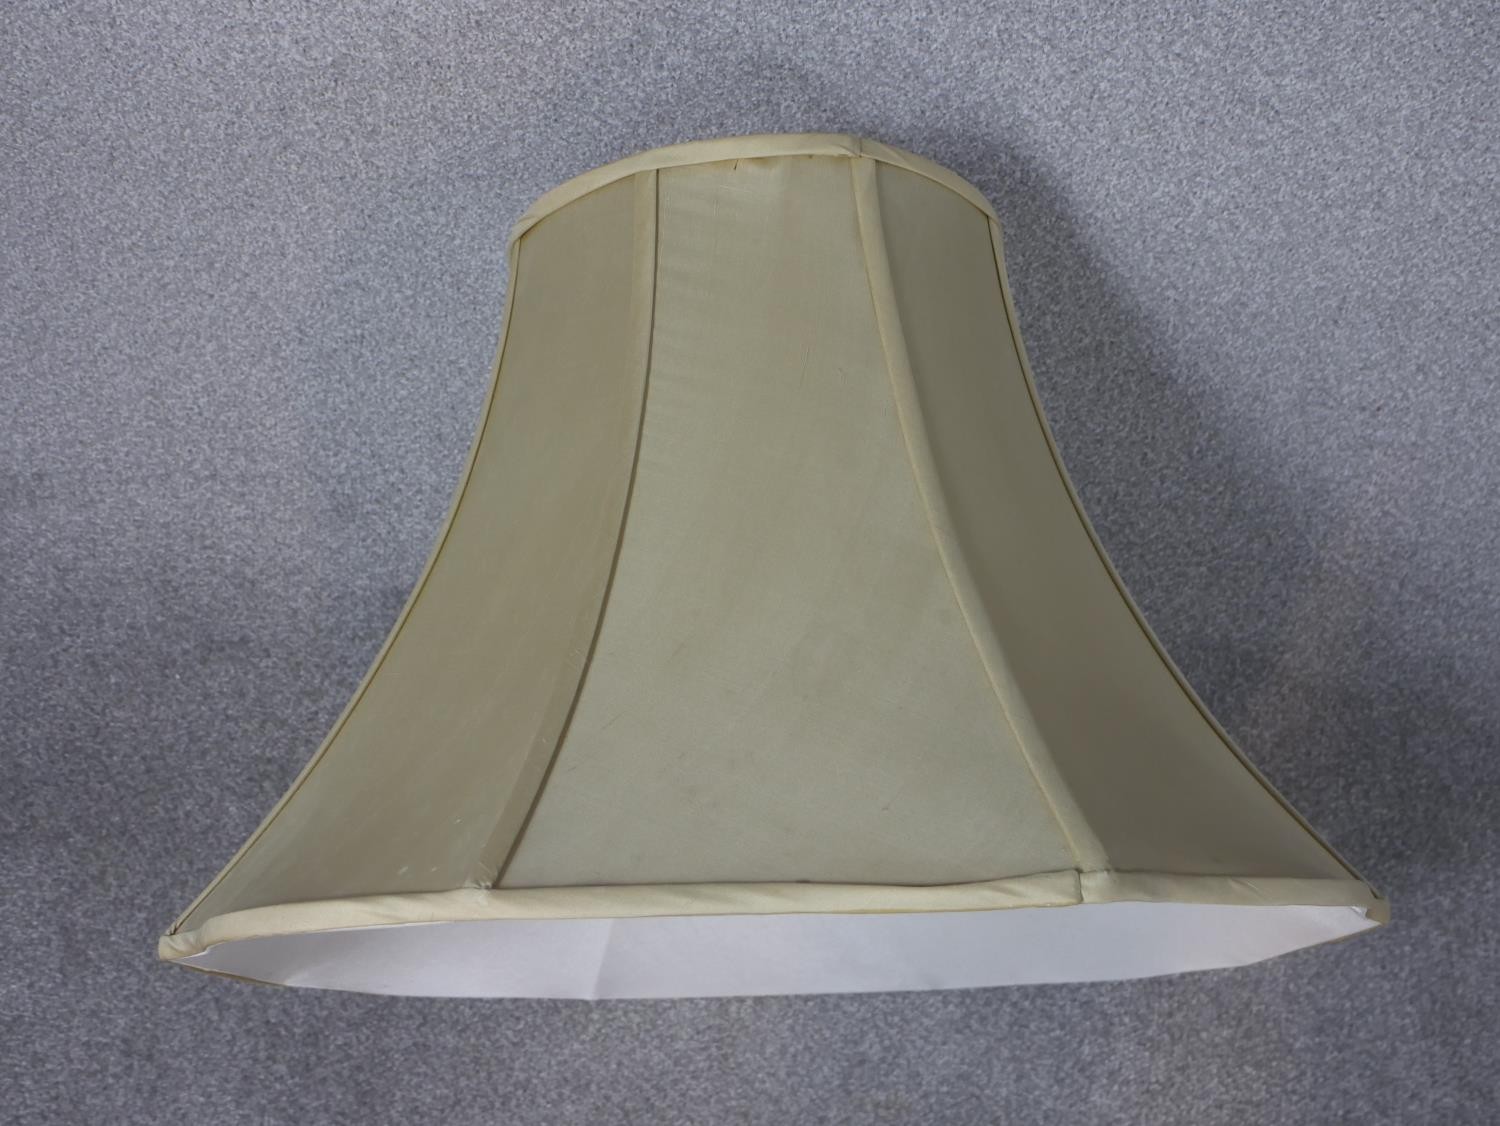 A 20th century turned brass standard lamp, on a circular base with a turned wood foot. H.164cm - Image 7 of 7